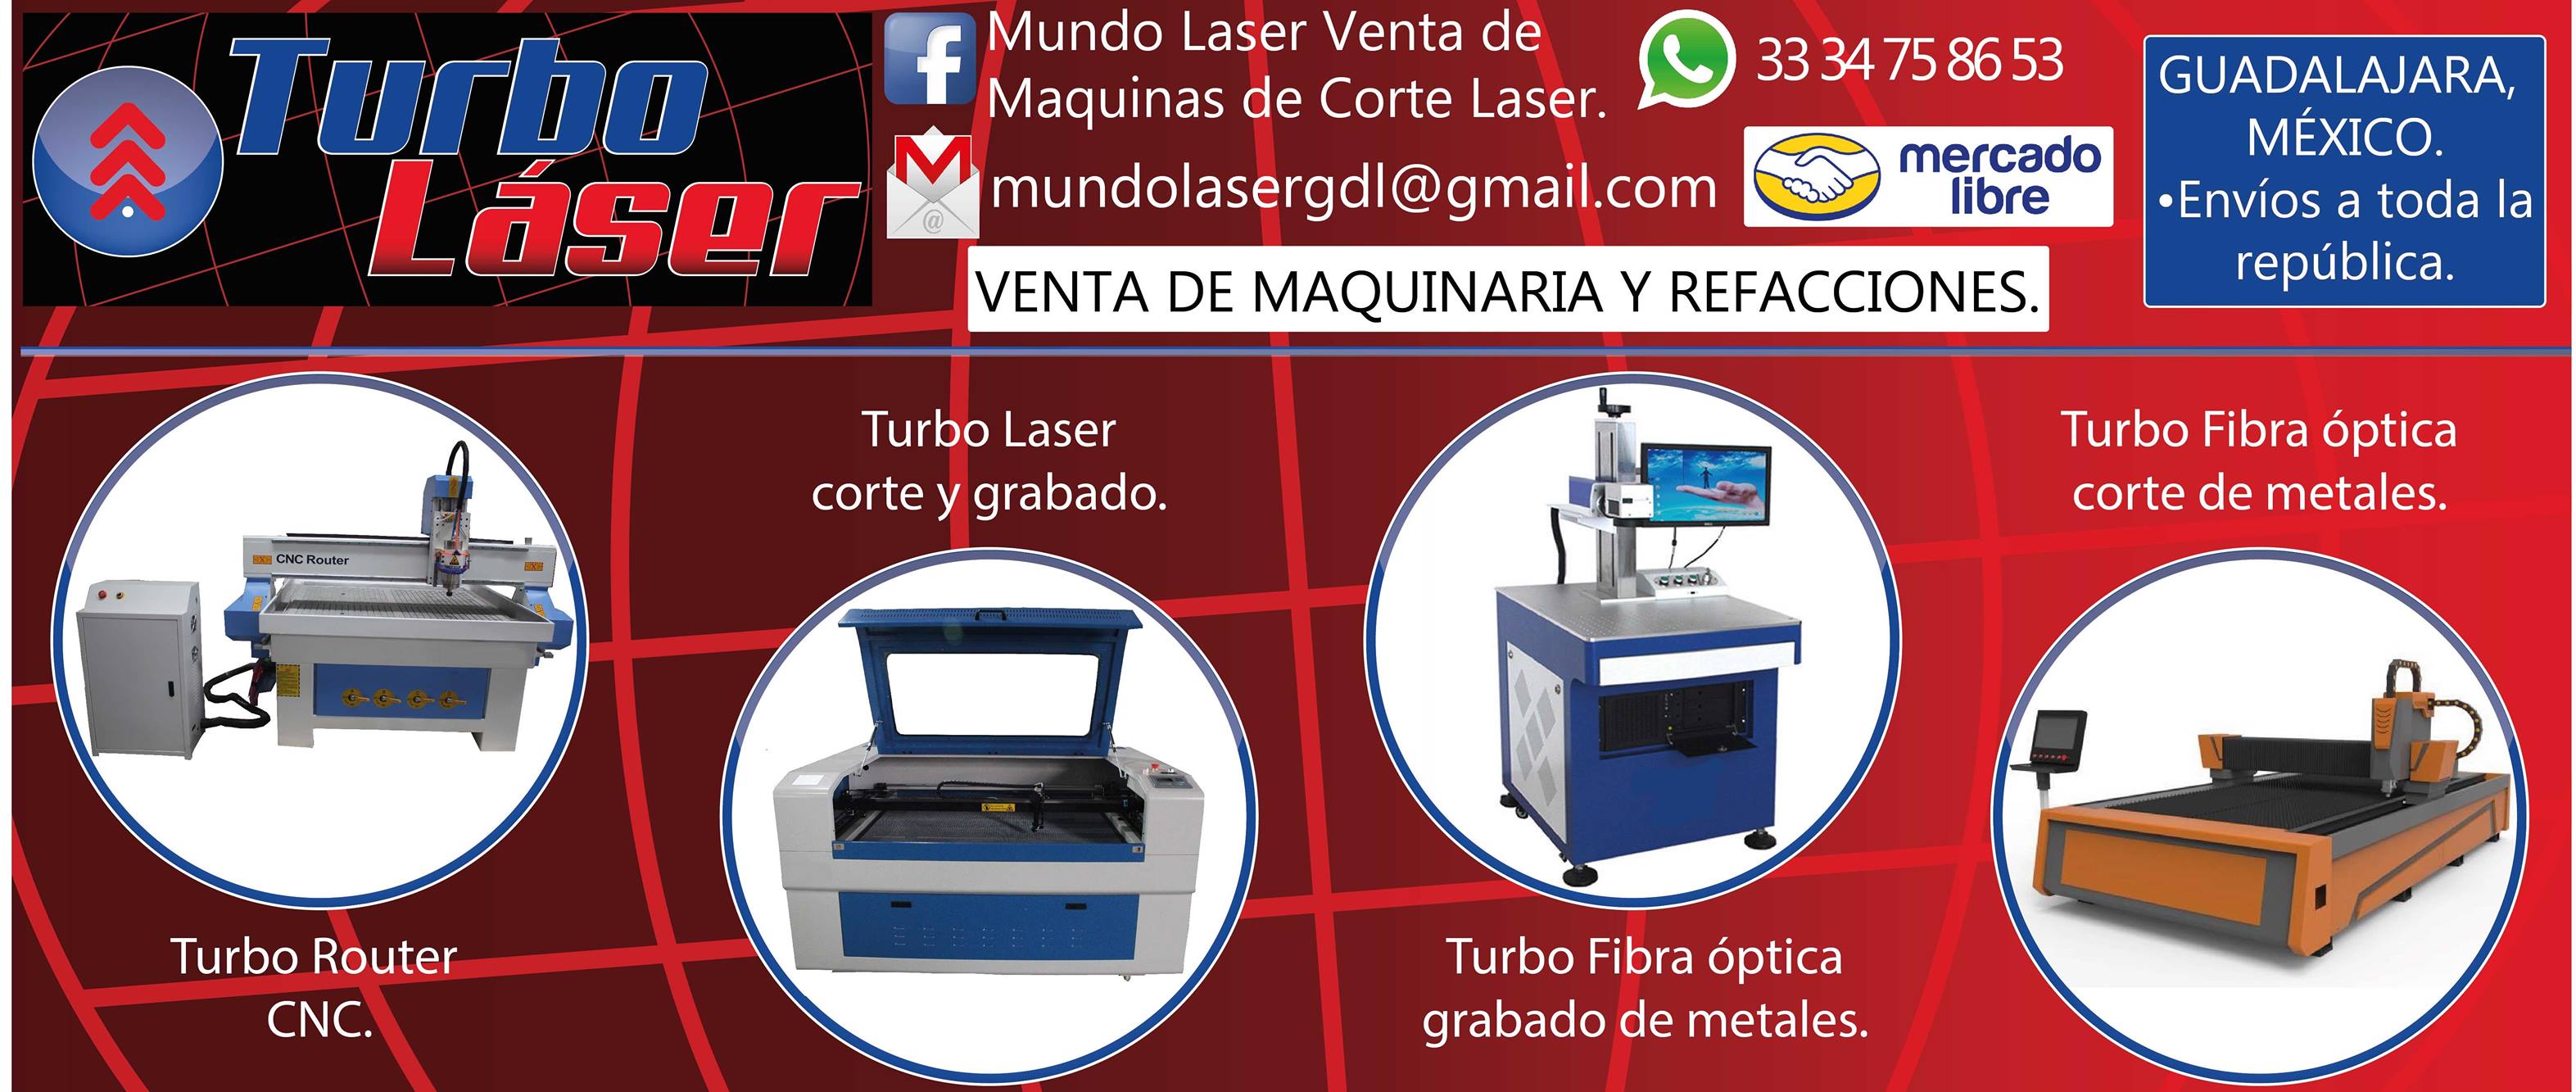 get_the_best_Cnc Router_ad